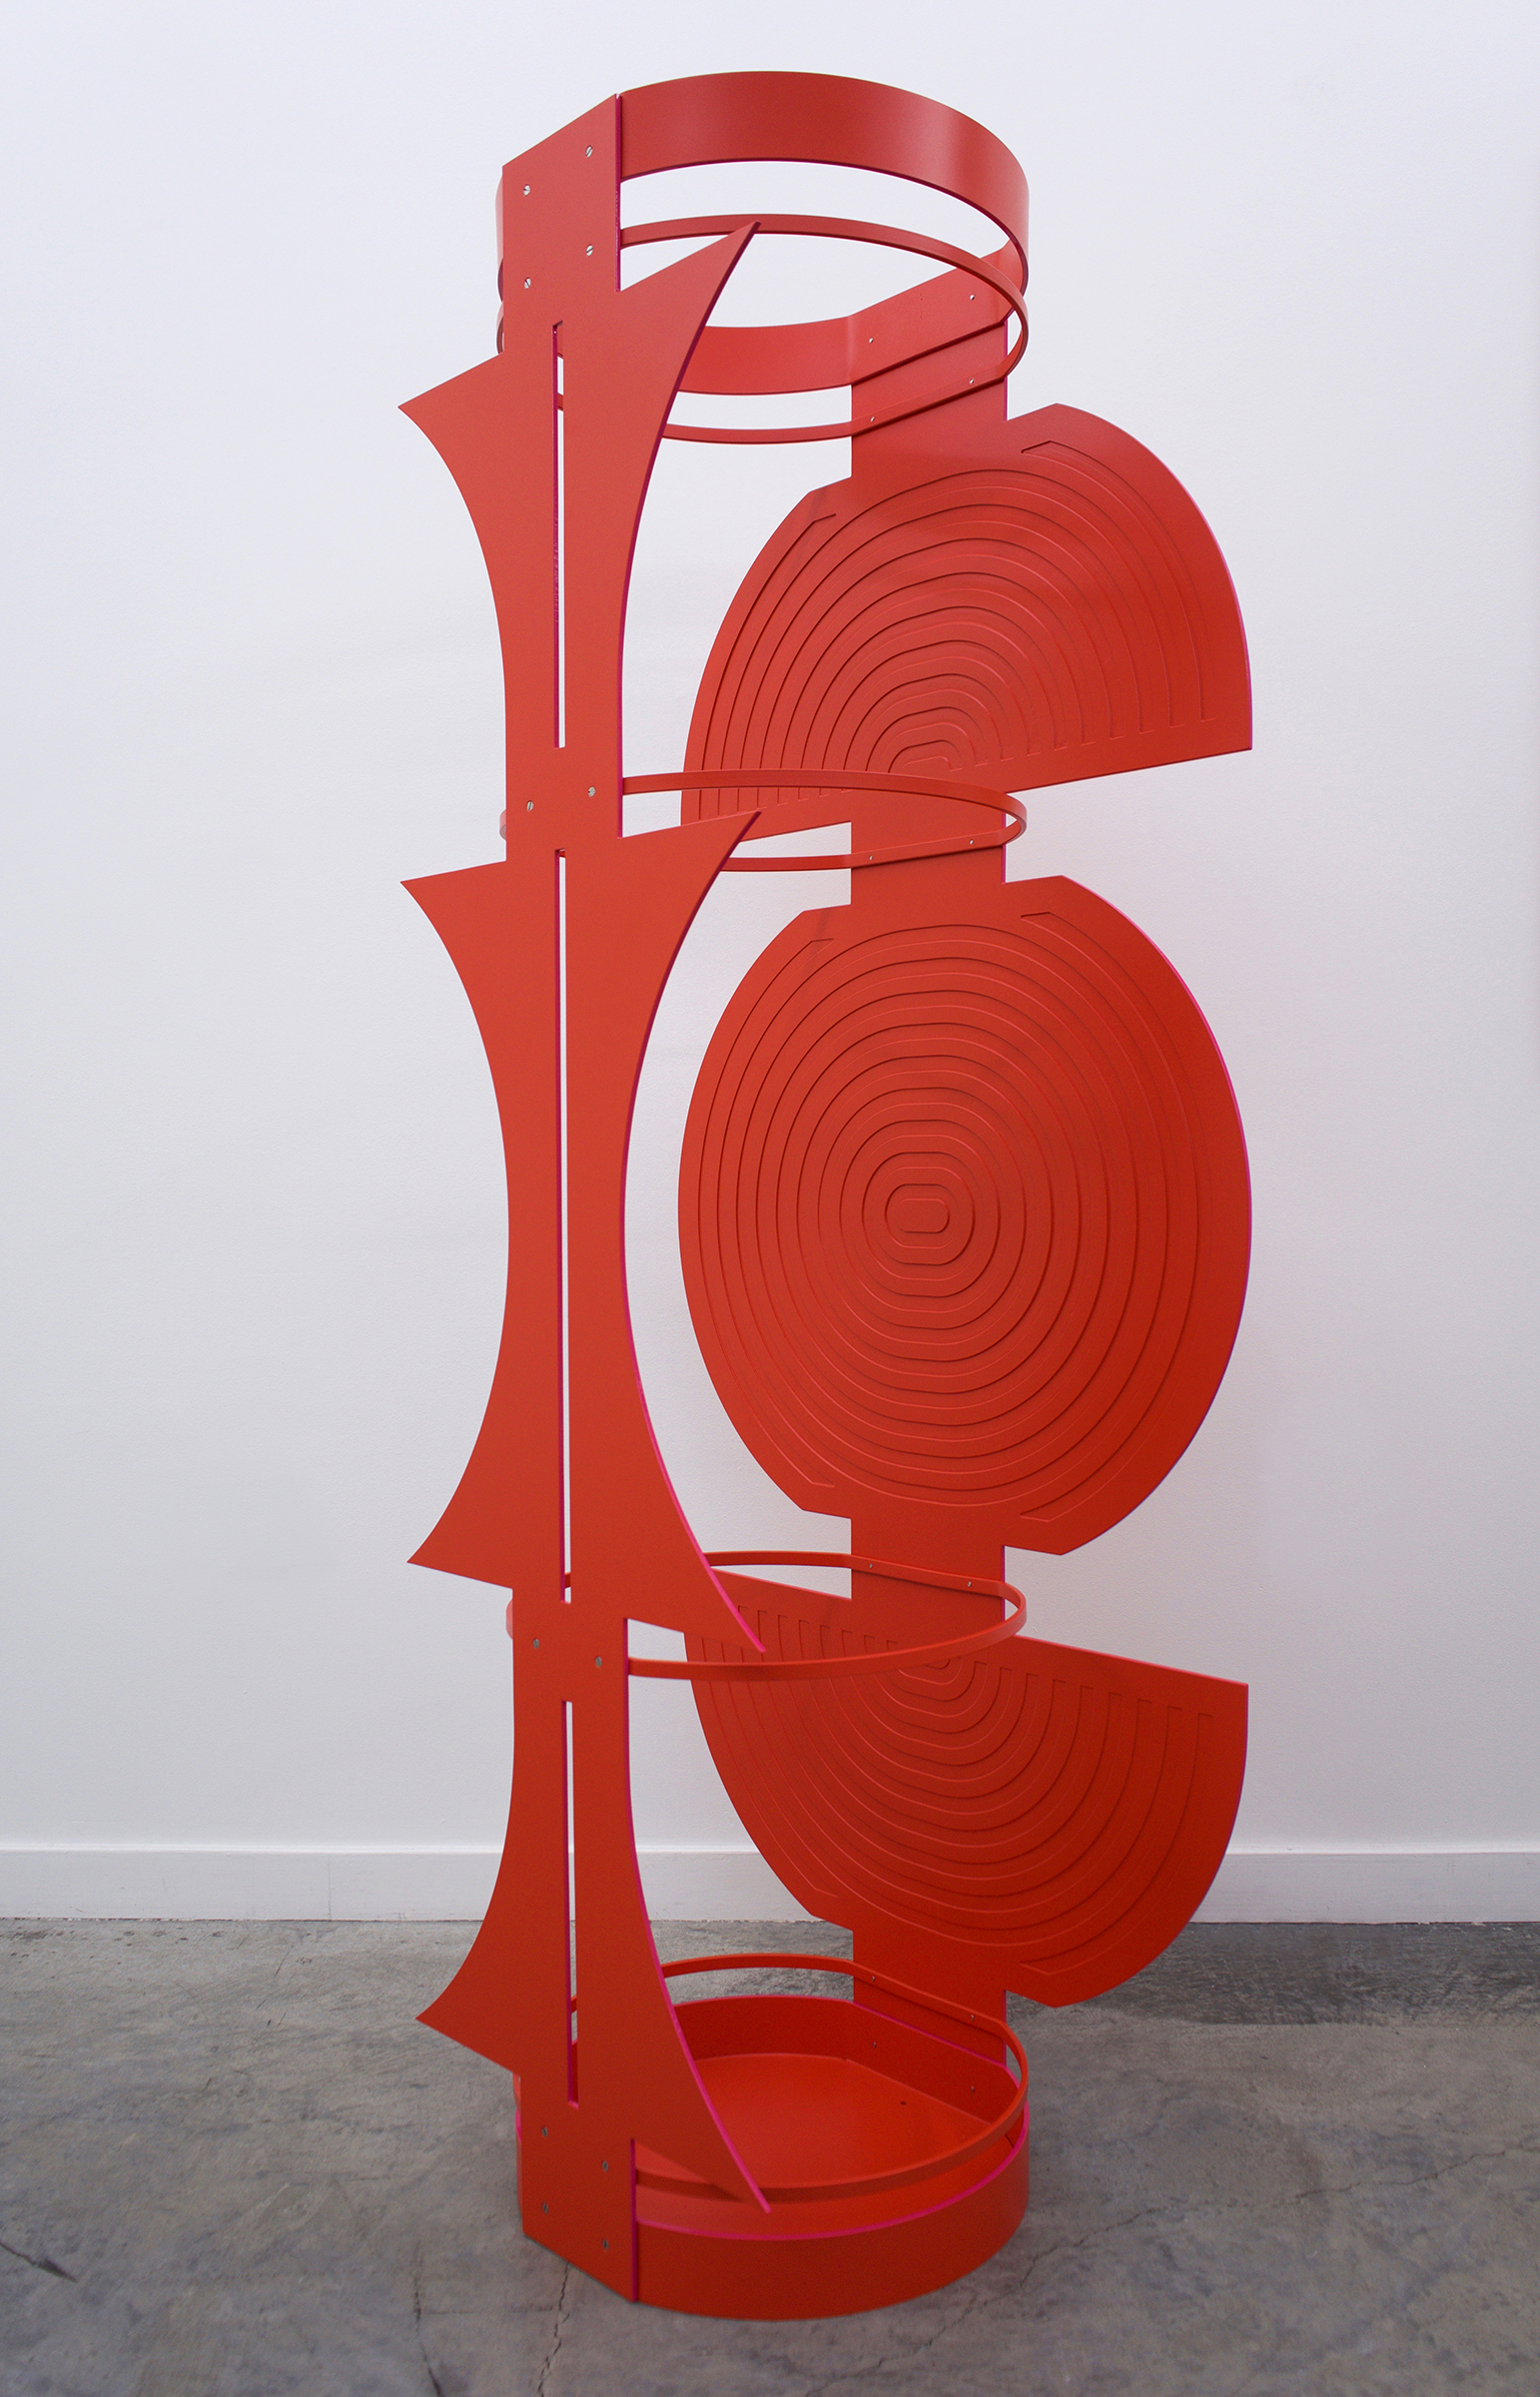  ELISE FERGUSON  Armour , 2019 powder coated aluminum with stainless steel fasteners 66” x 28” x 18” 